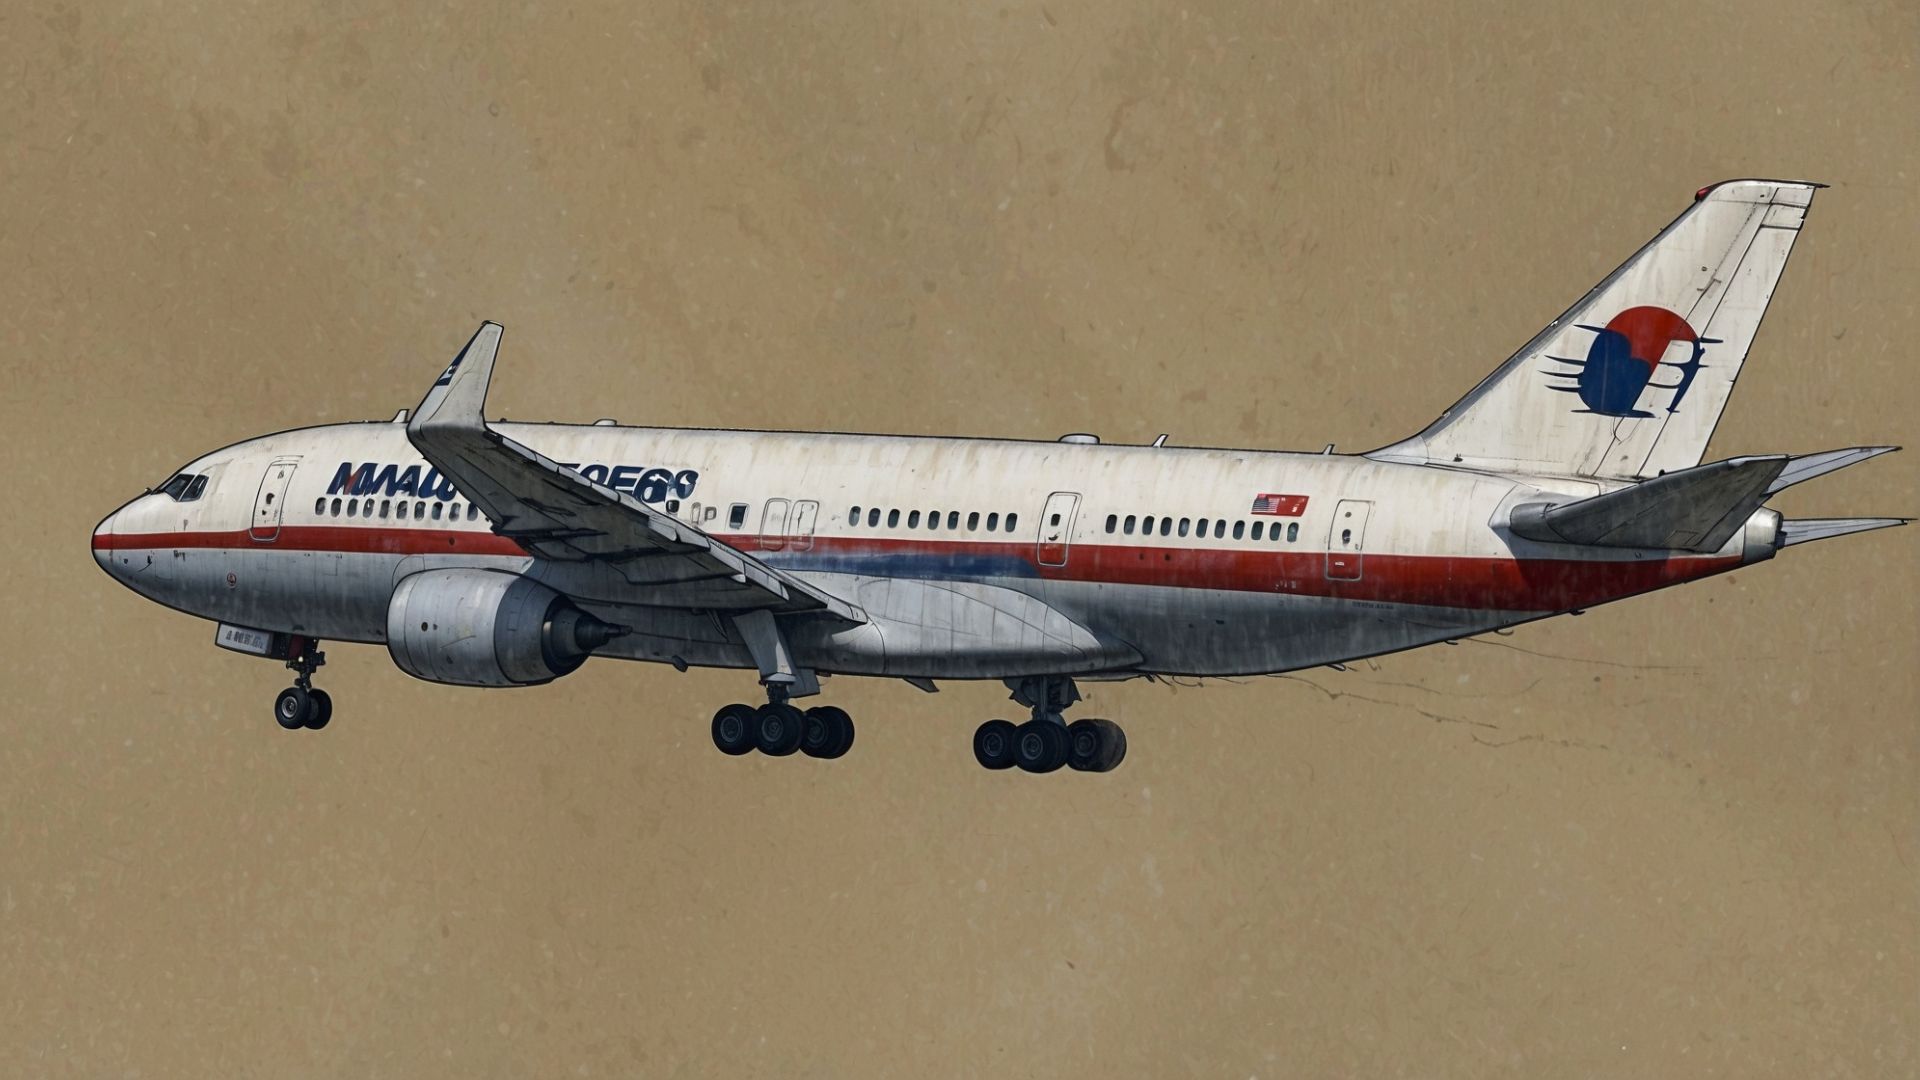 The Disappearance of Malaysia Airlines Flight 370